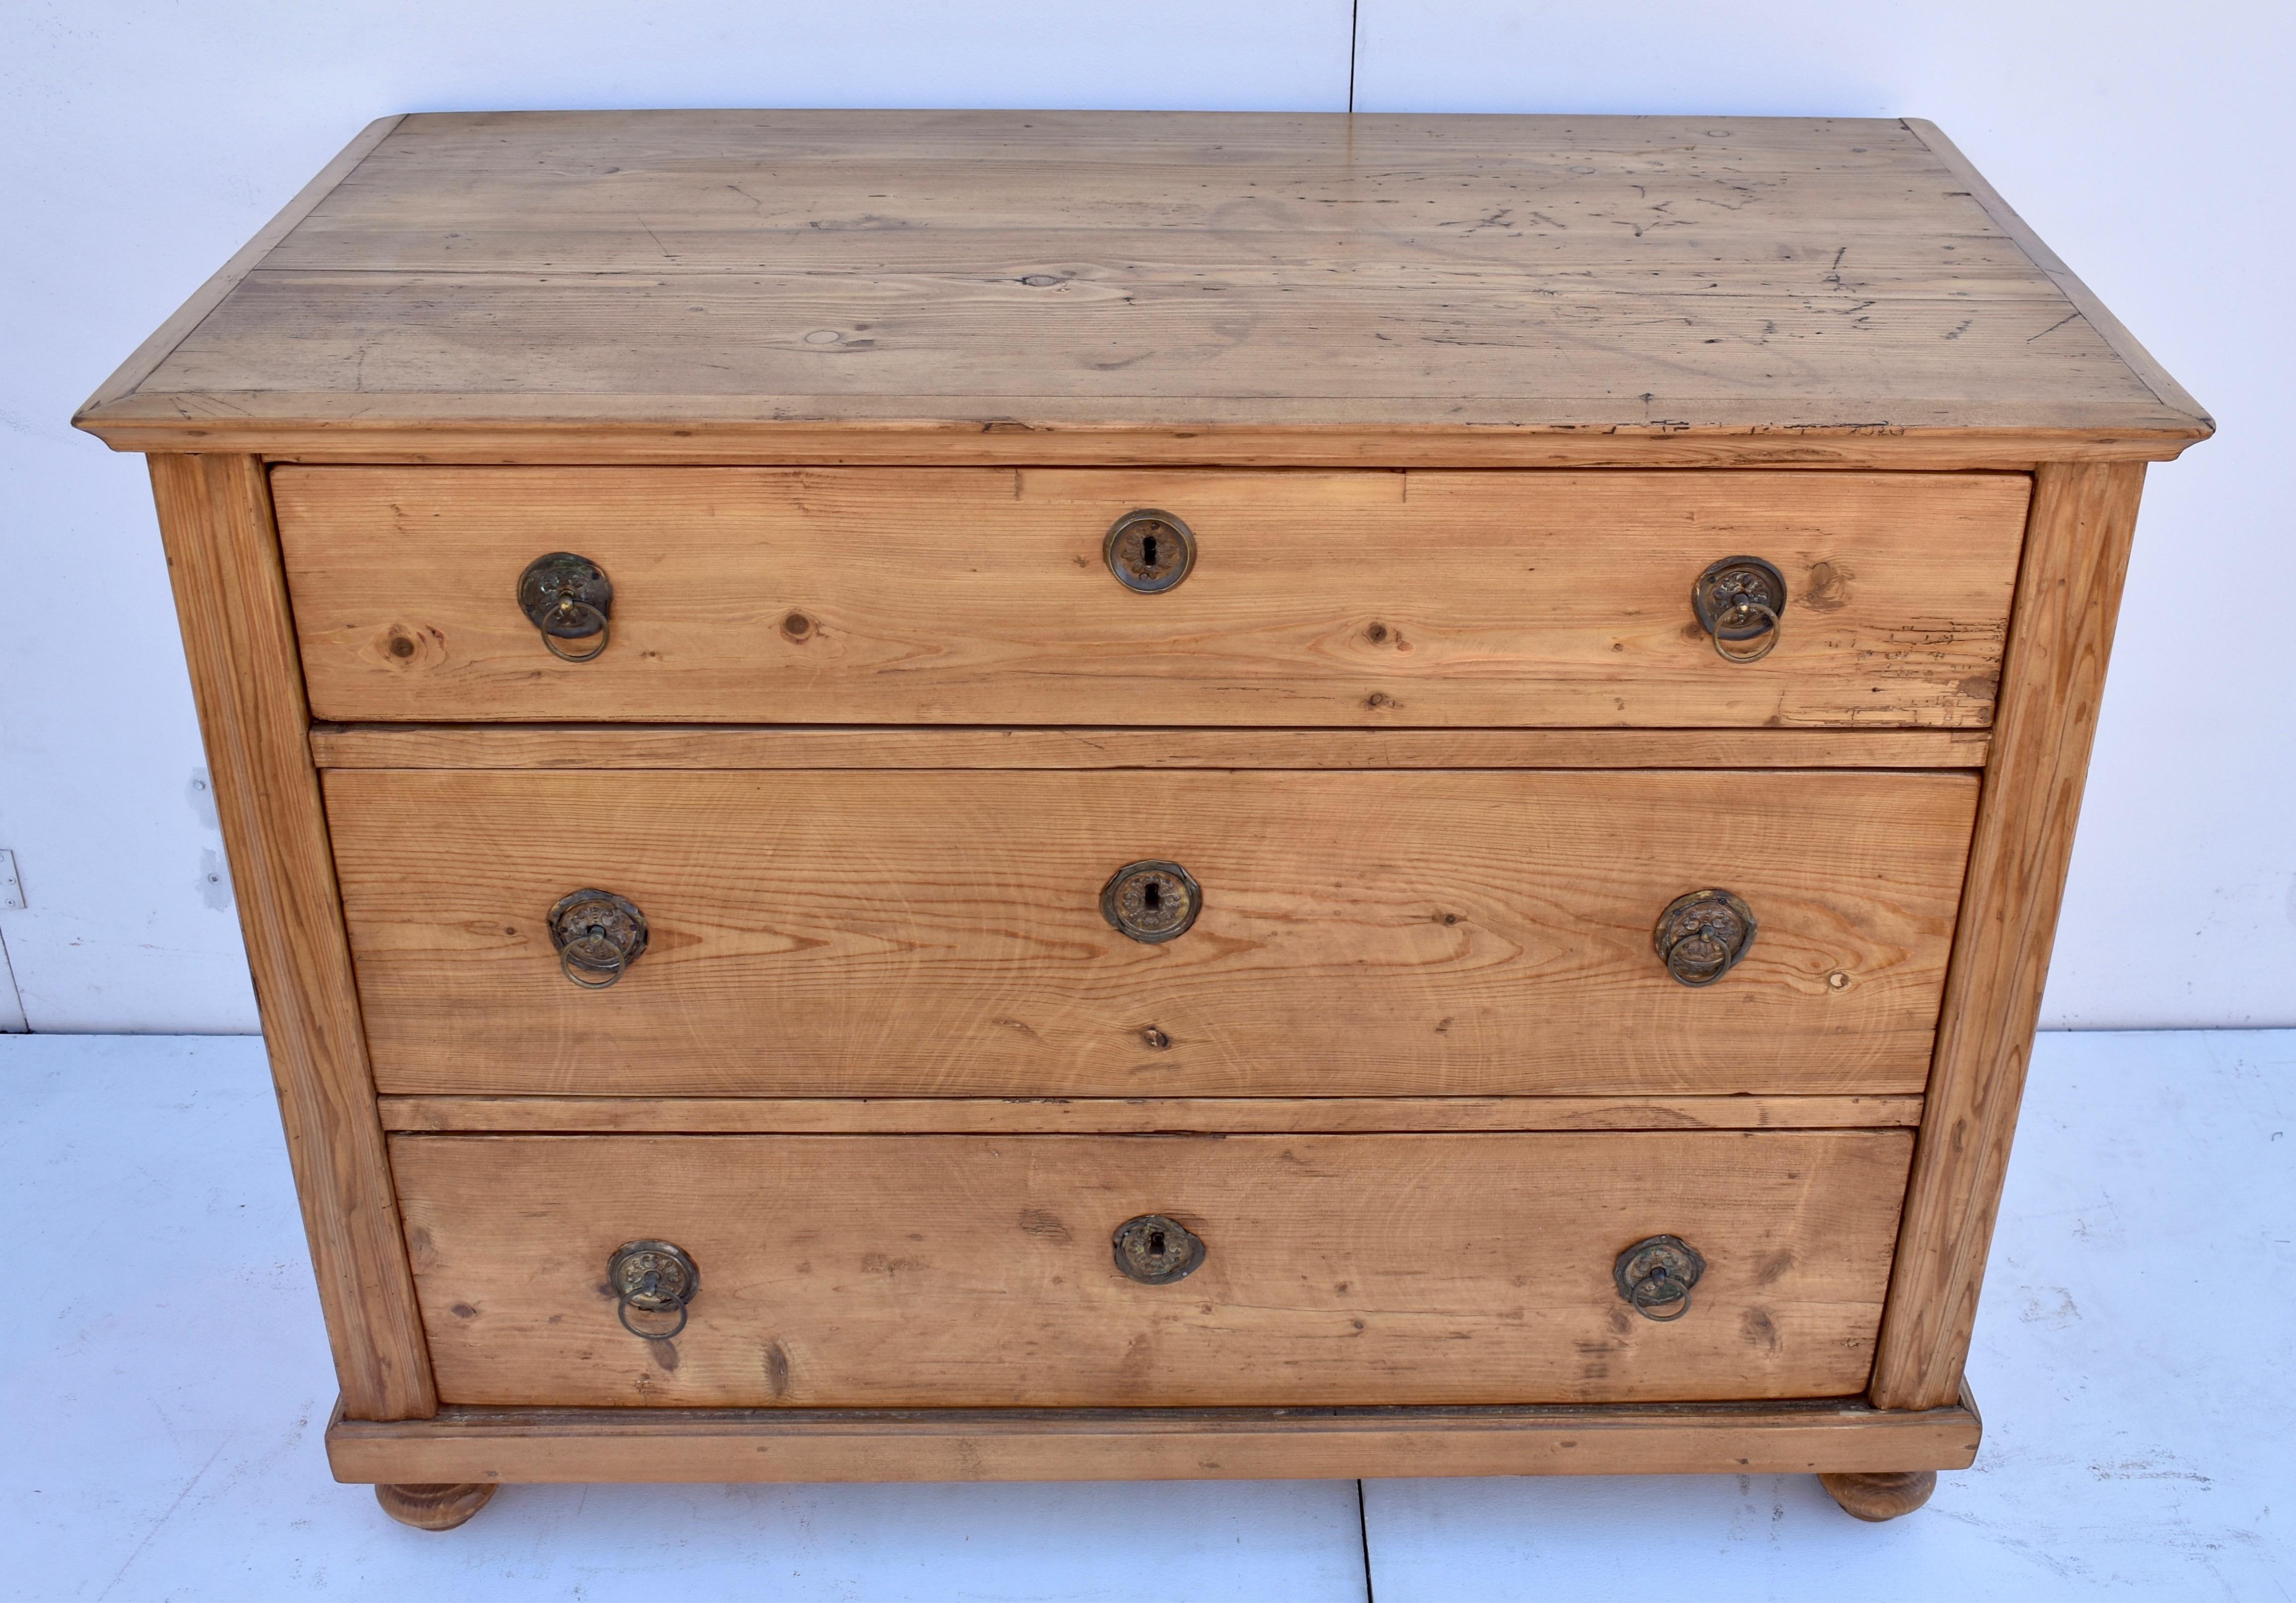 This heavy and sturdy chest has a beautiful top, bordered with ogee crown molding and the front corners have bold fluting. The three hand-cut dovetailed drawers are different depths but are not graduated top to bottom, as is usual. Each one has two